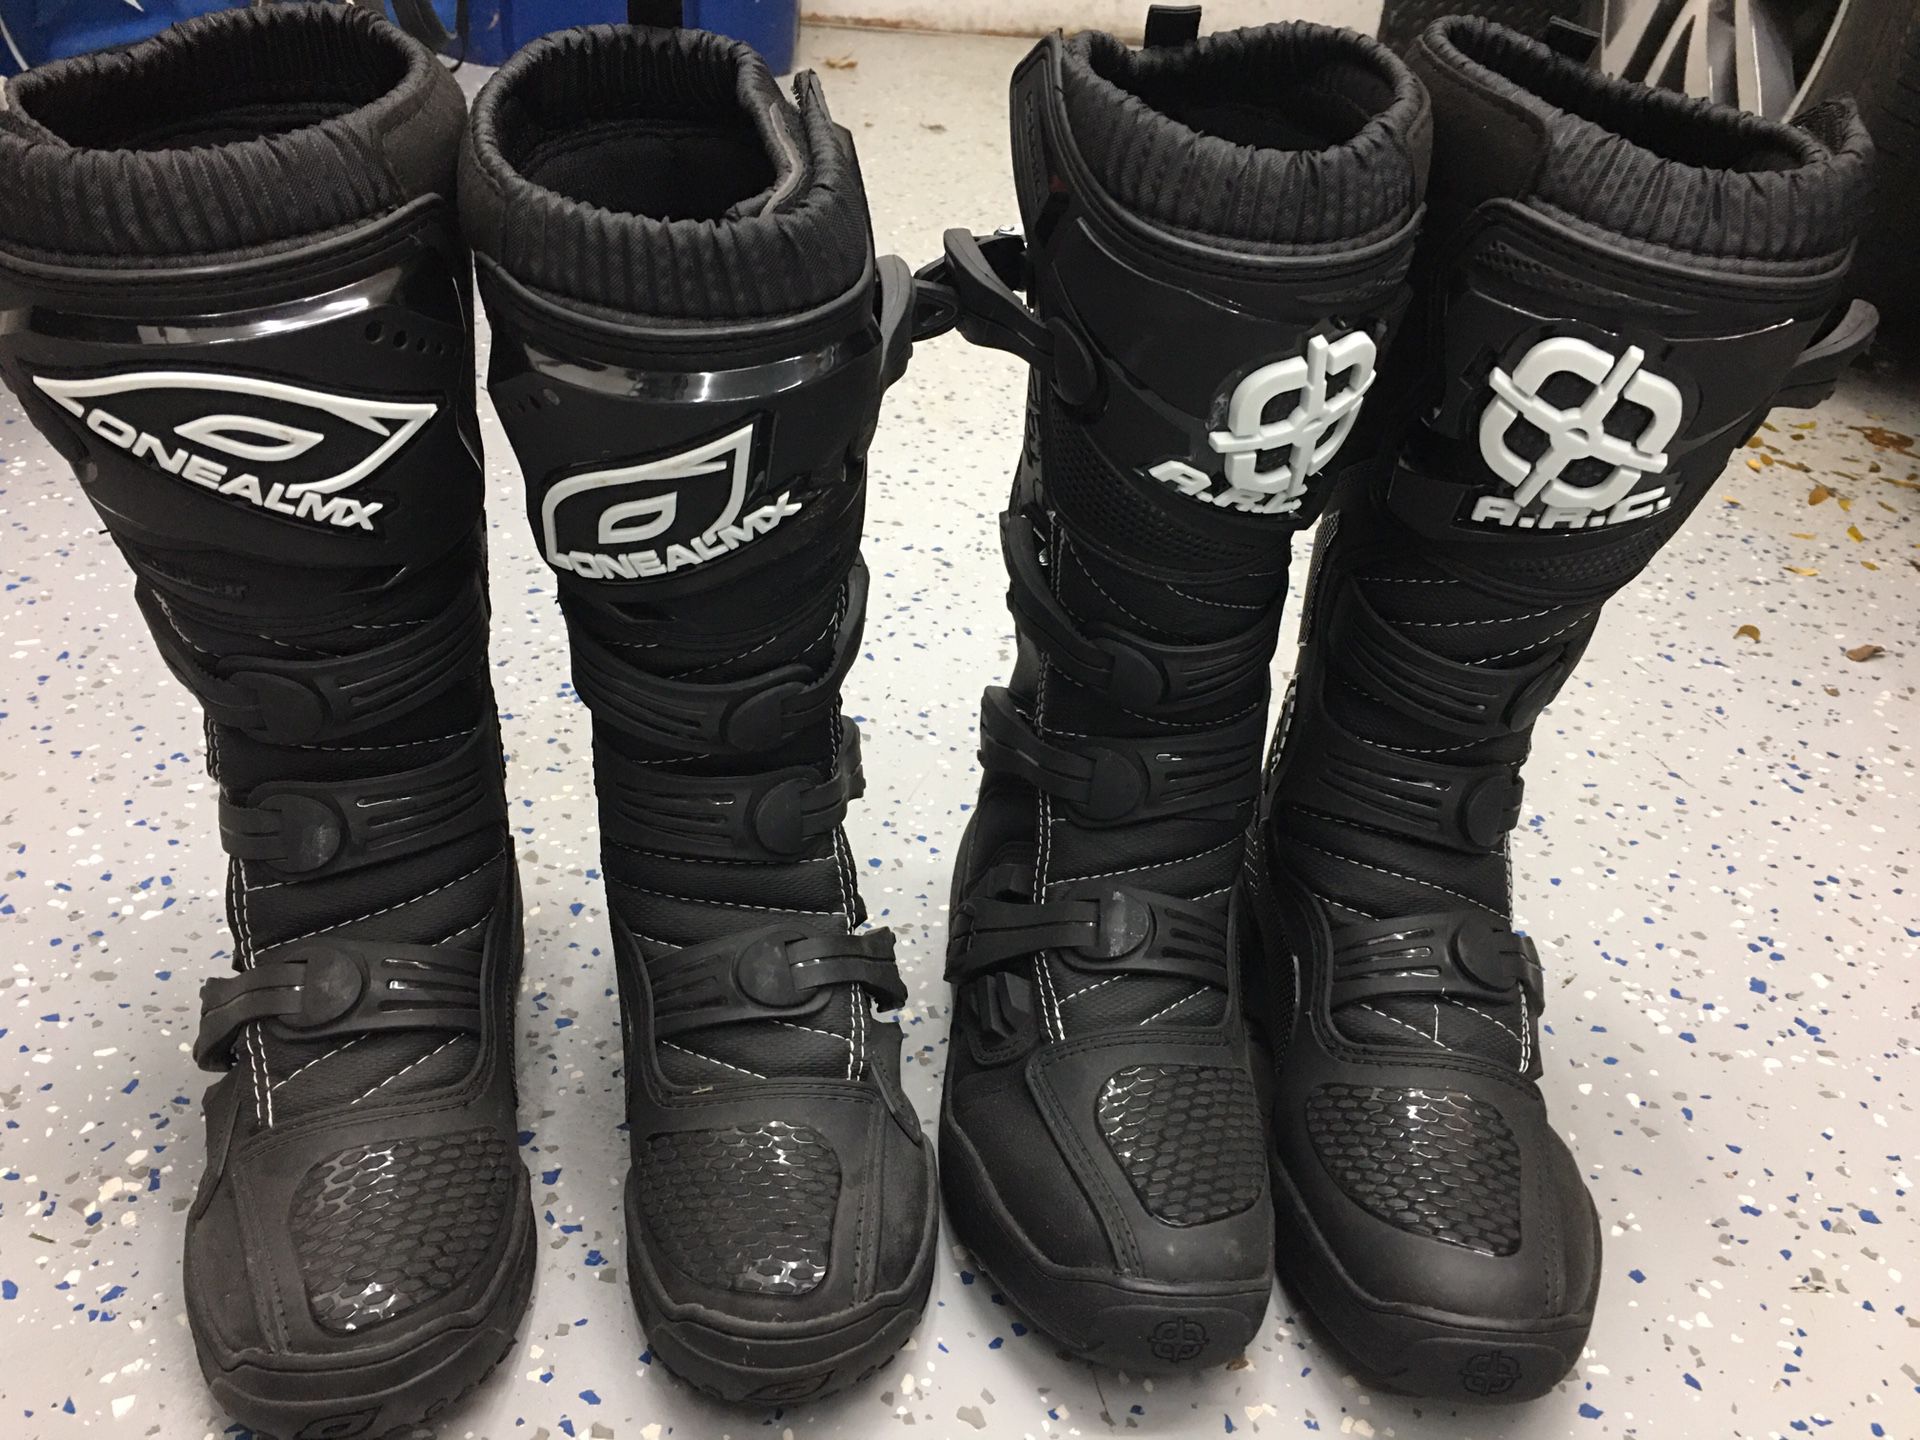 Dirt bike boots—sizes 7 and 9